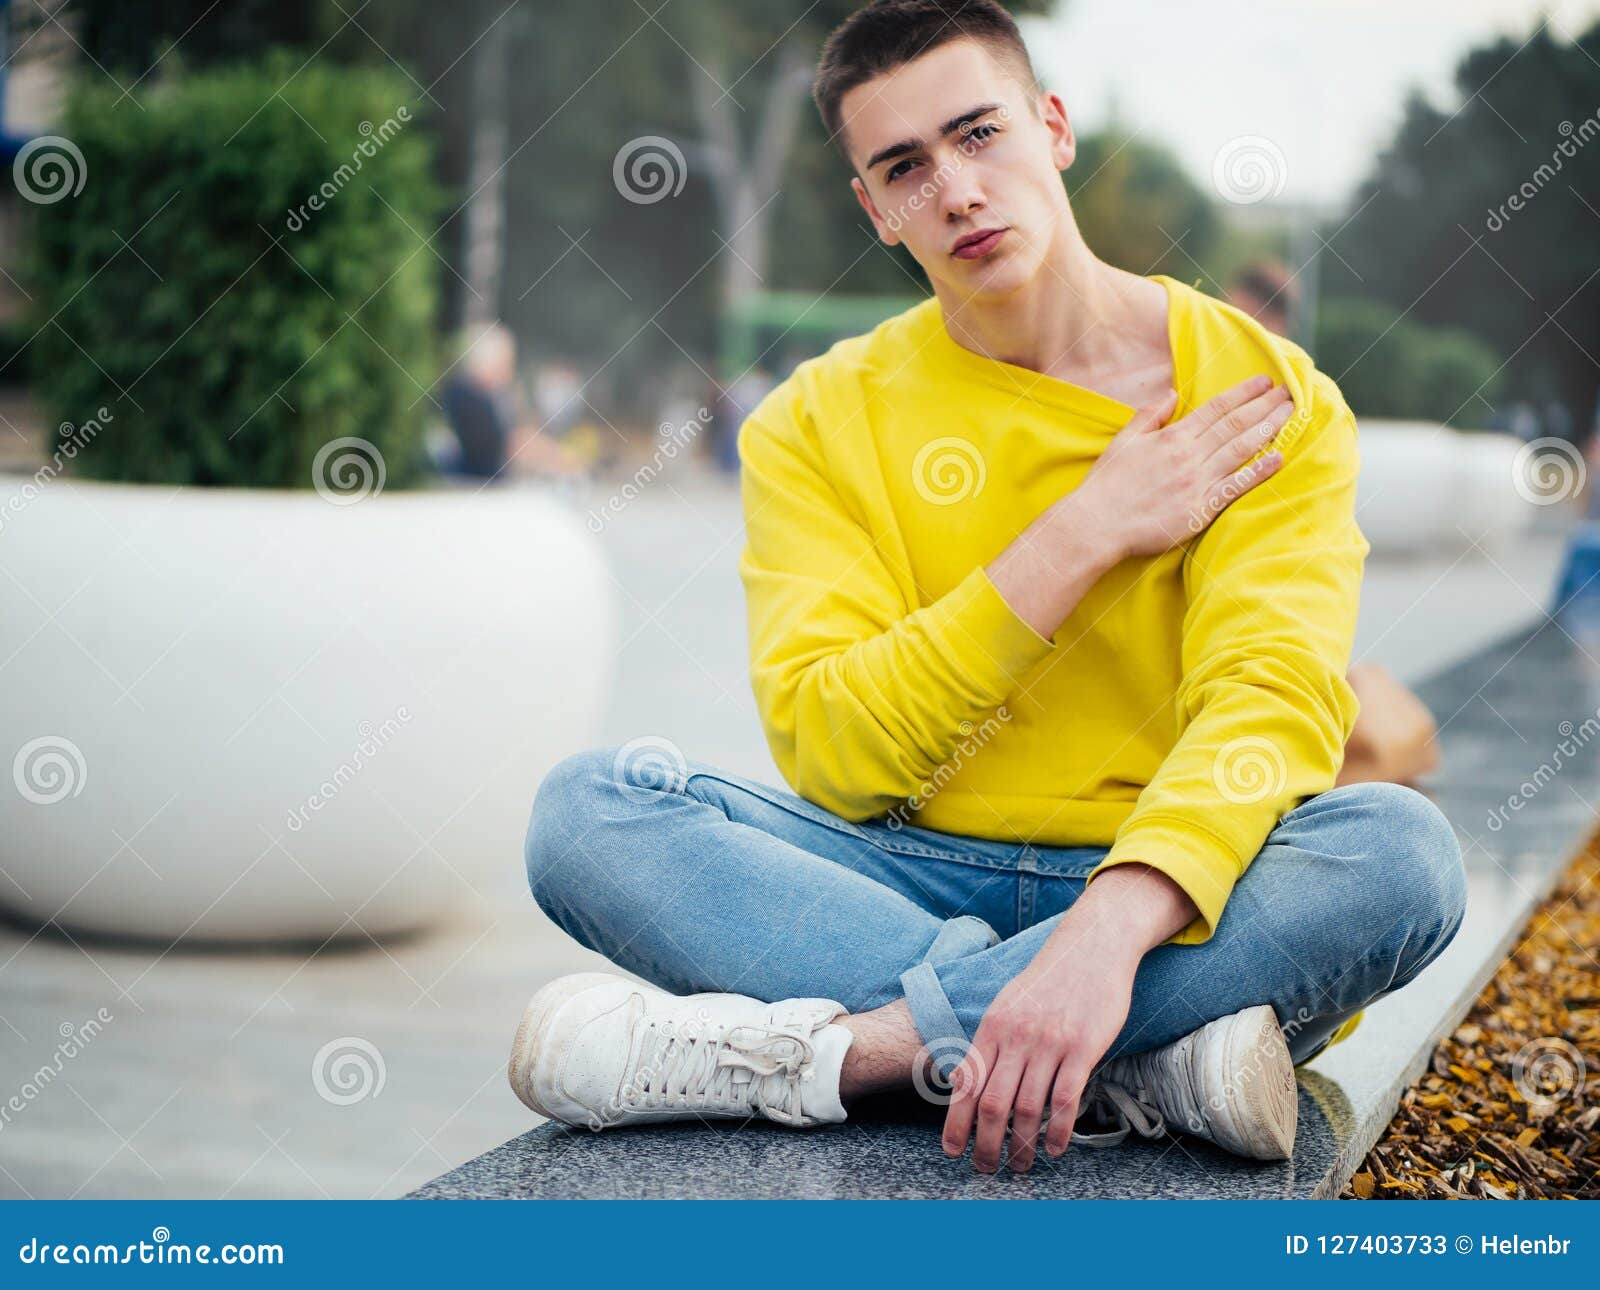 Young Attractive Man in a Yellow Sweater Stock Image - Image of blue ...